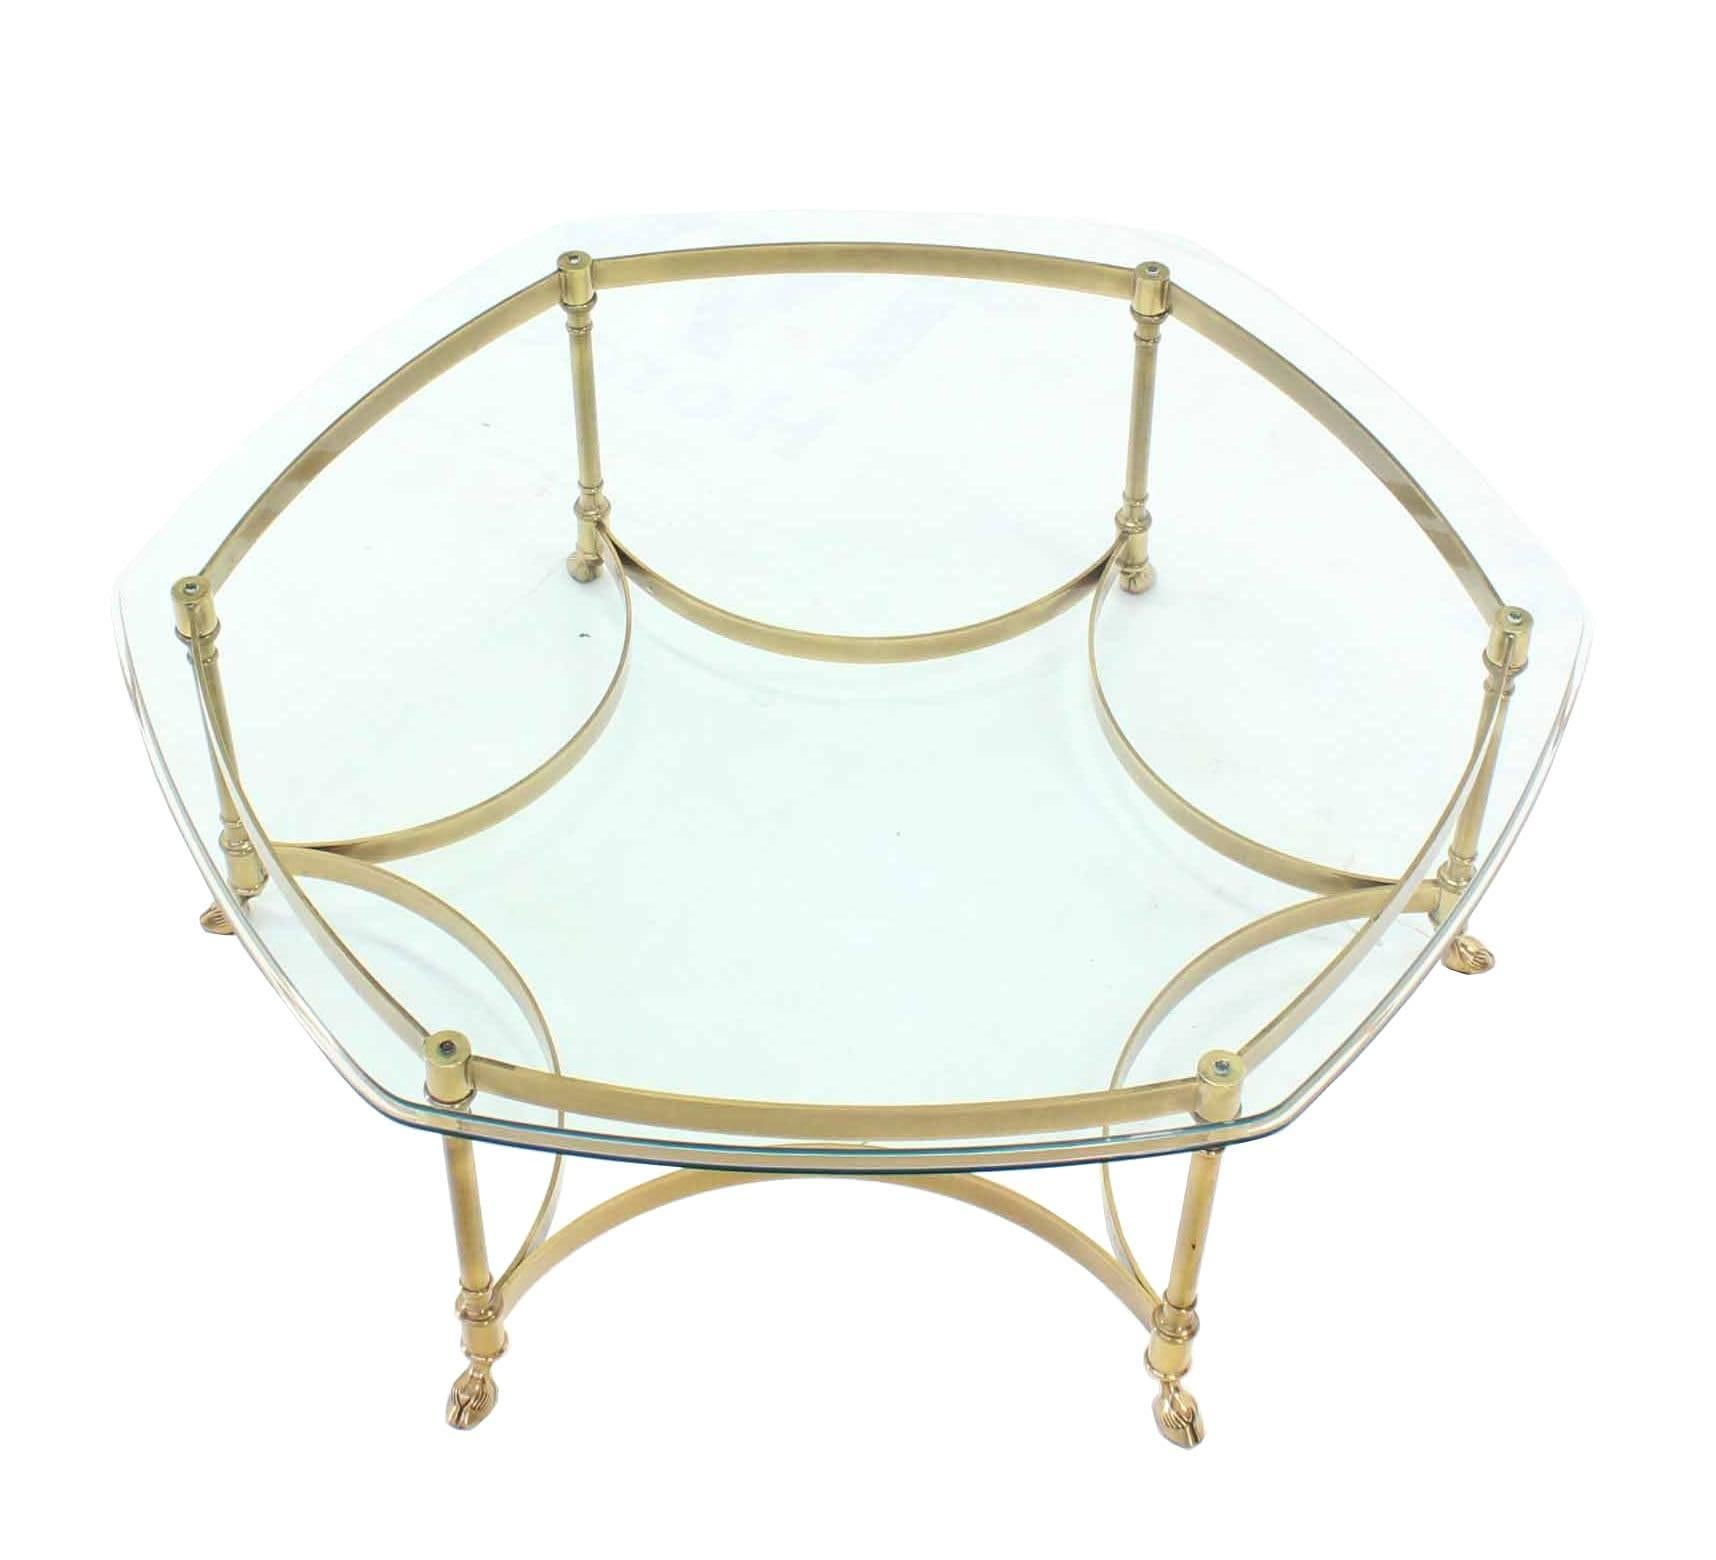 Very nice mid-century modern solid brass hoof feet glass top rounded hexagon coffee table.